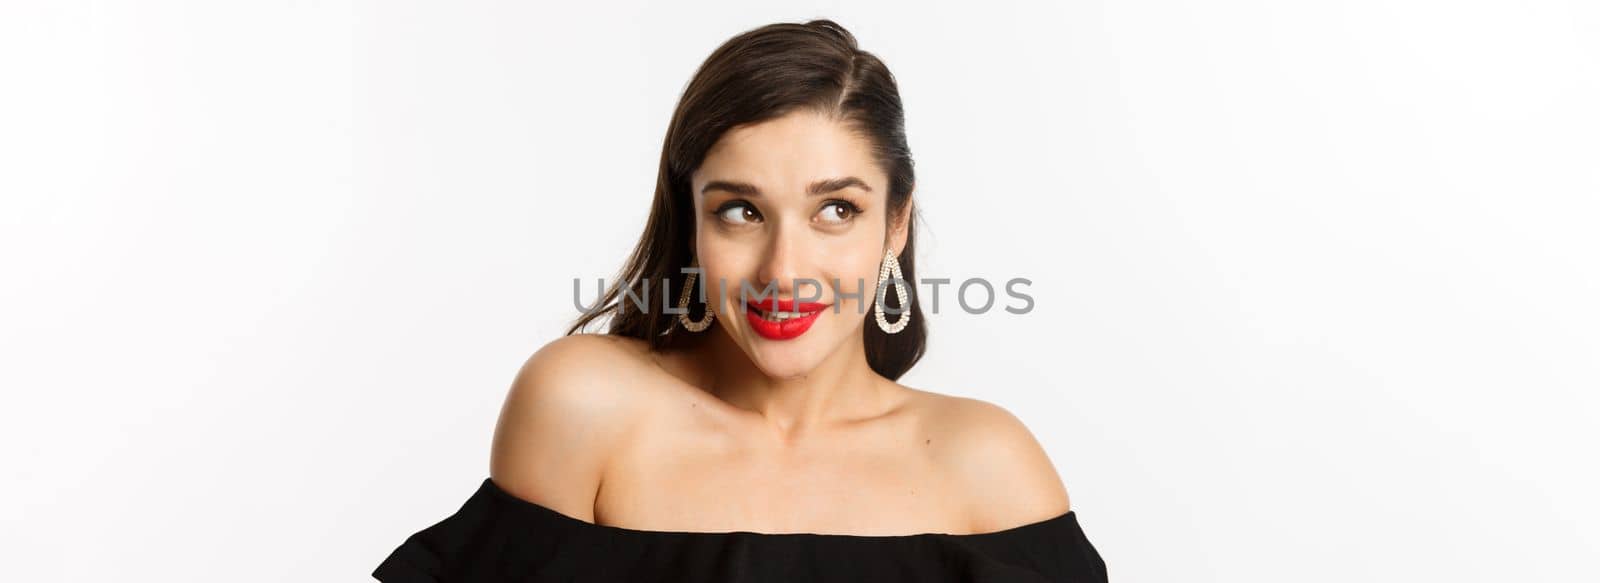 Fashion and beauty concept. Close-up of beautiful woman with red lips, makeup and black dress, showing her earrings and looking pleased, white background.